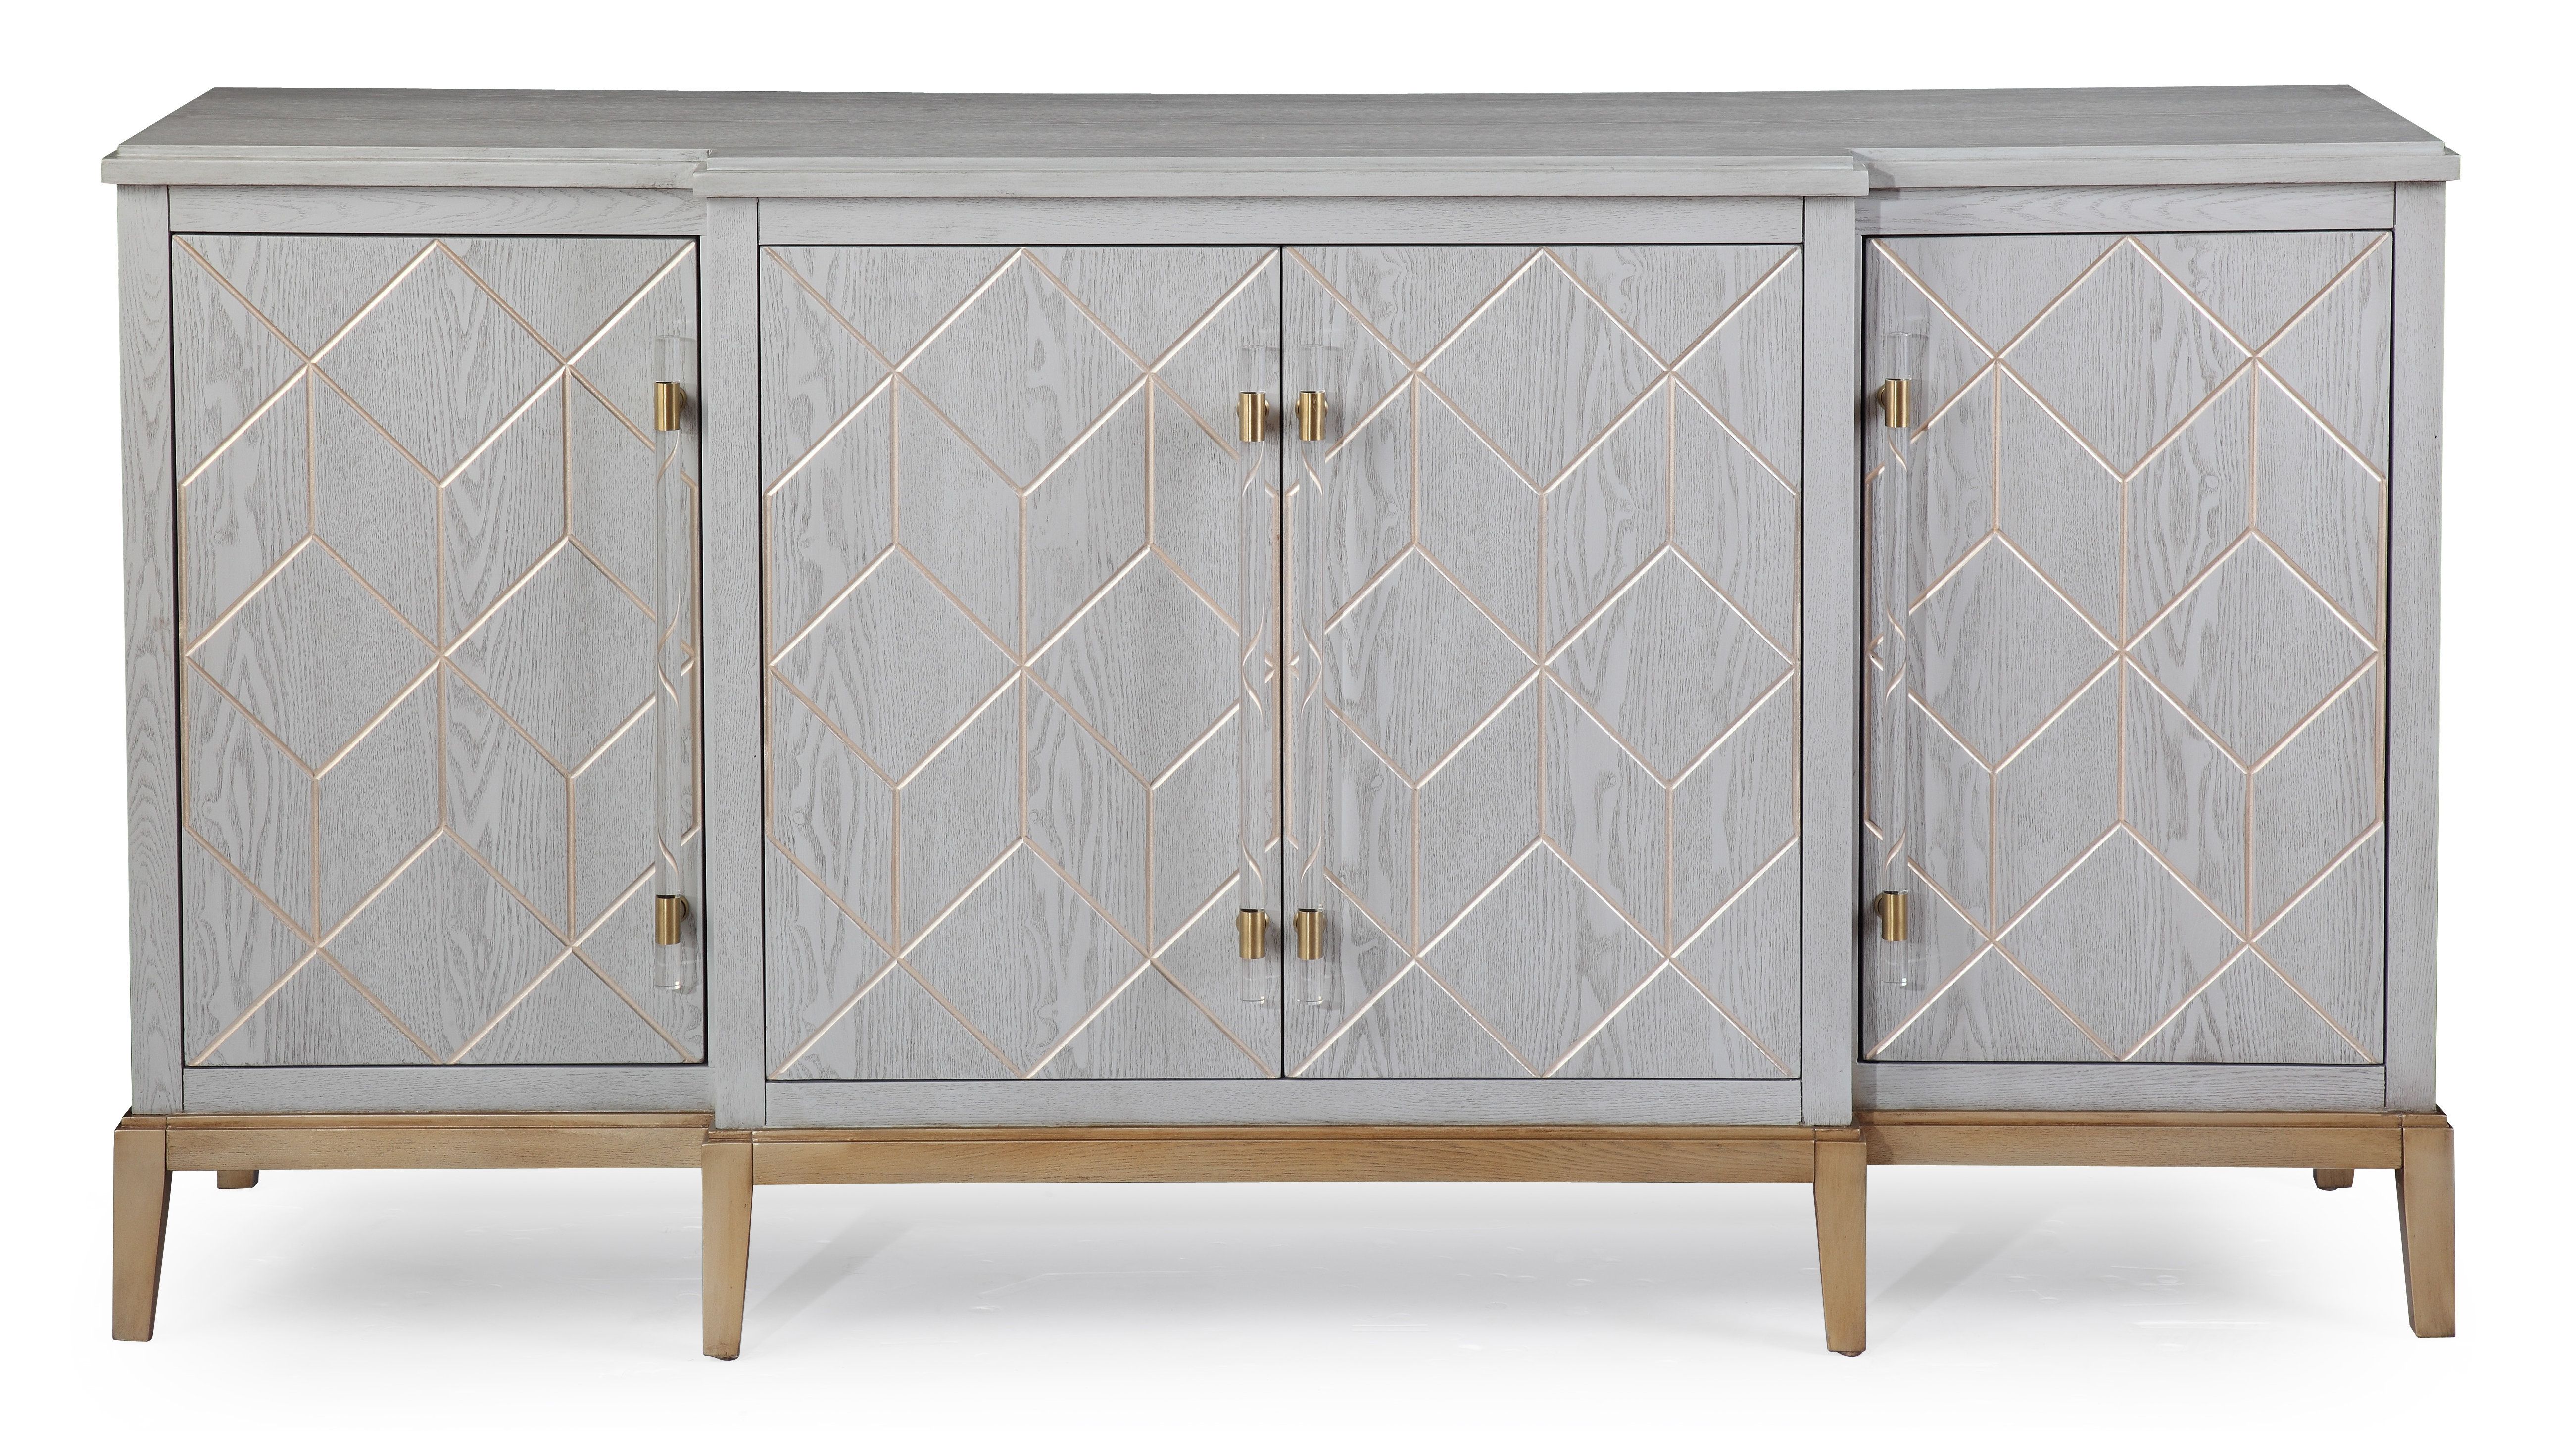 Remington Sideboard | Joss & Main Pertaining To Current Remington Sideboards (View 19 of 20)